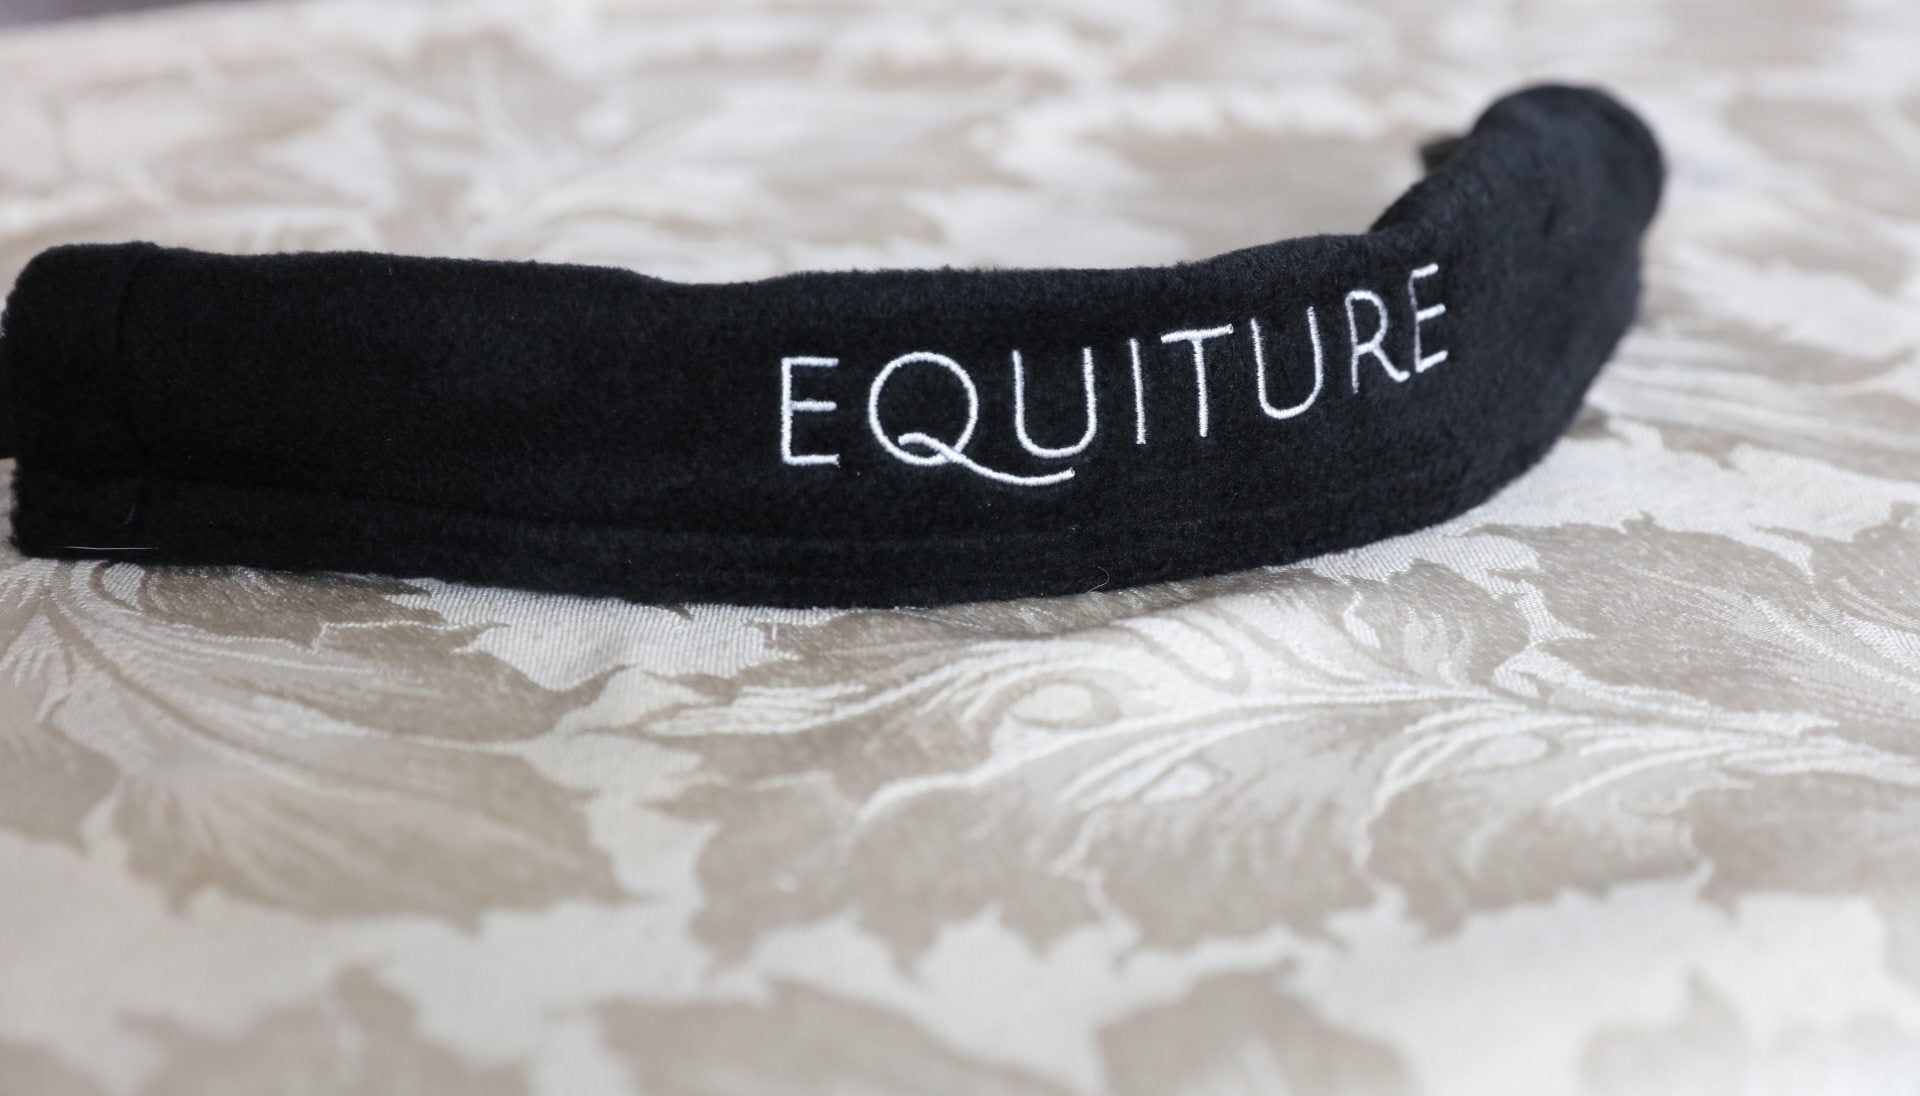 Equiture Sapphire, clear and light sapphire megabling curve browband